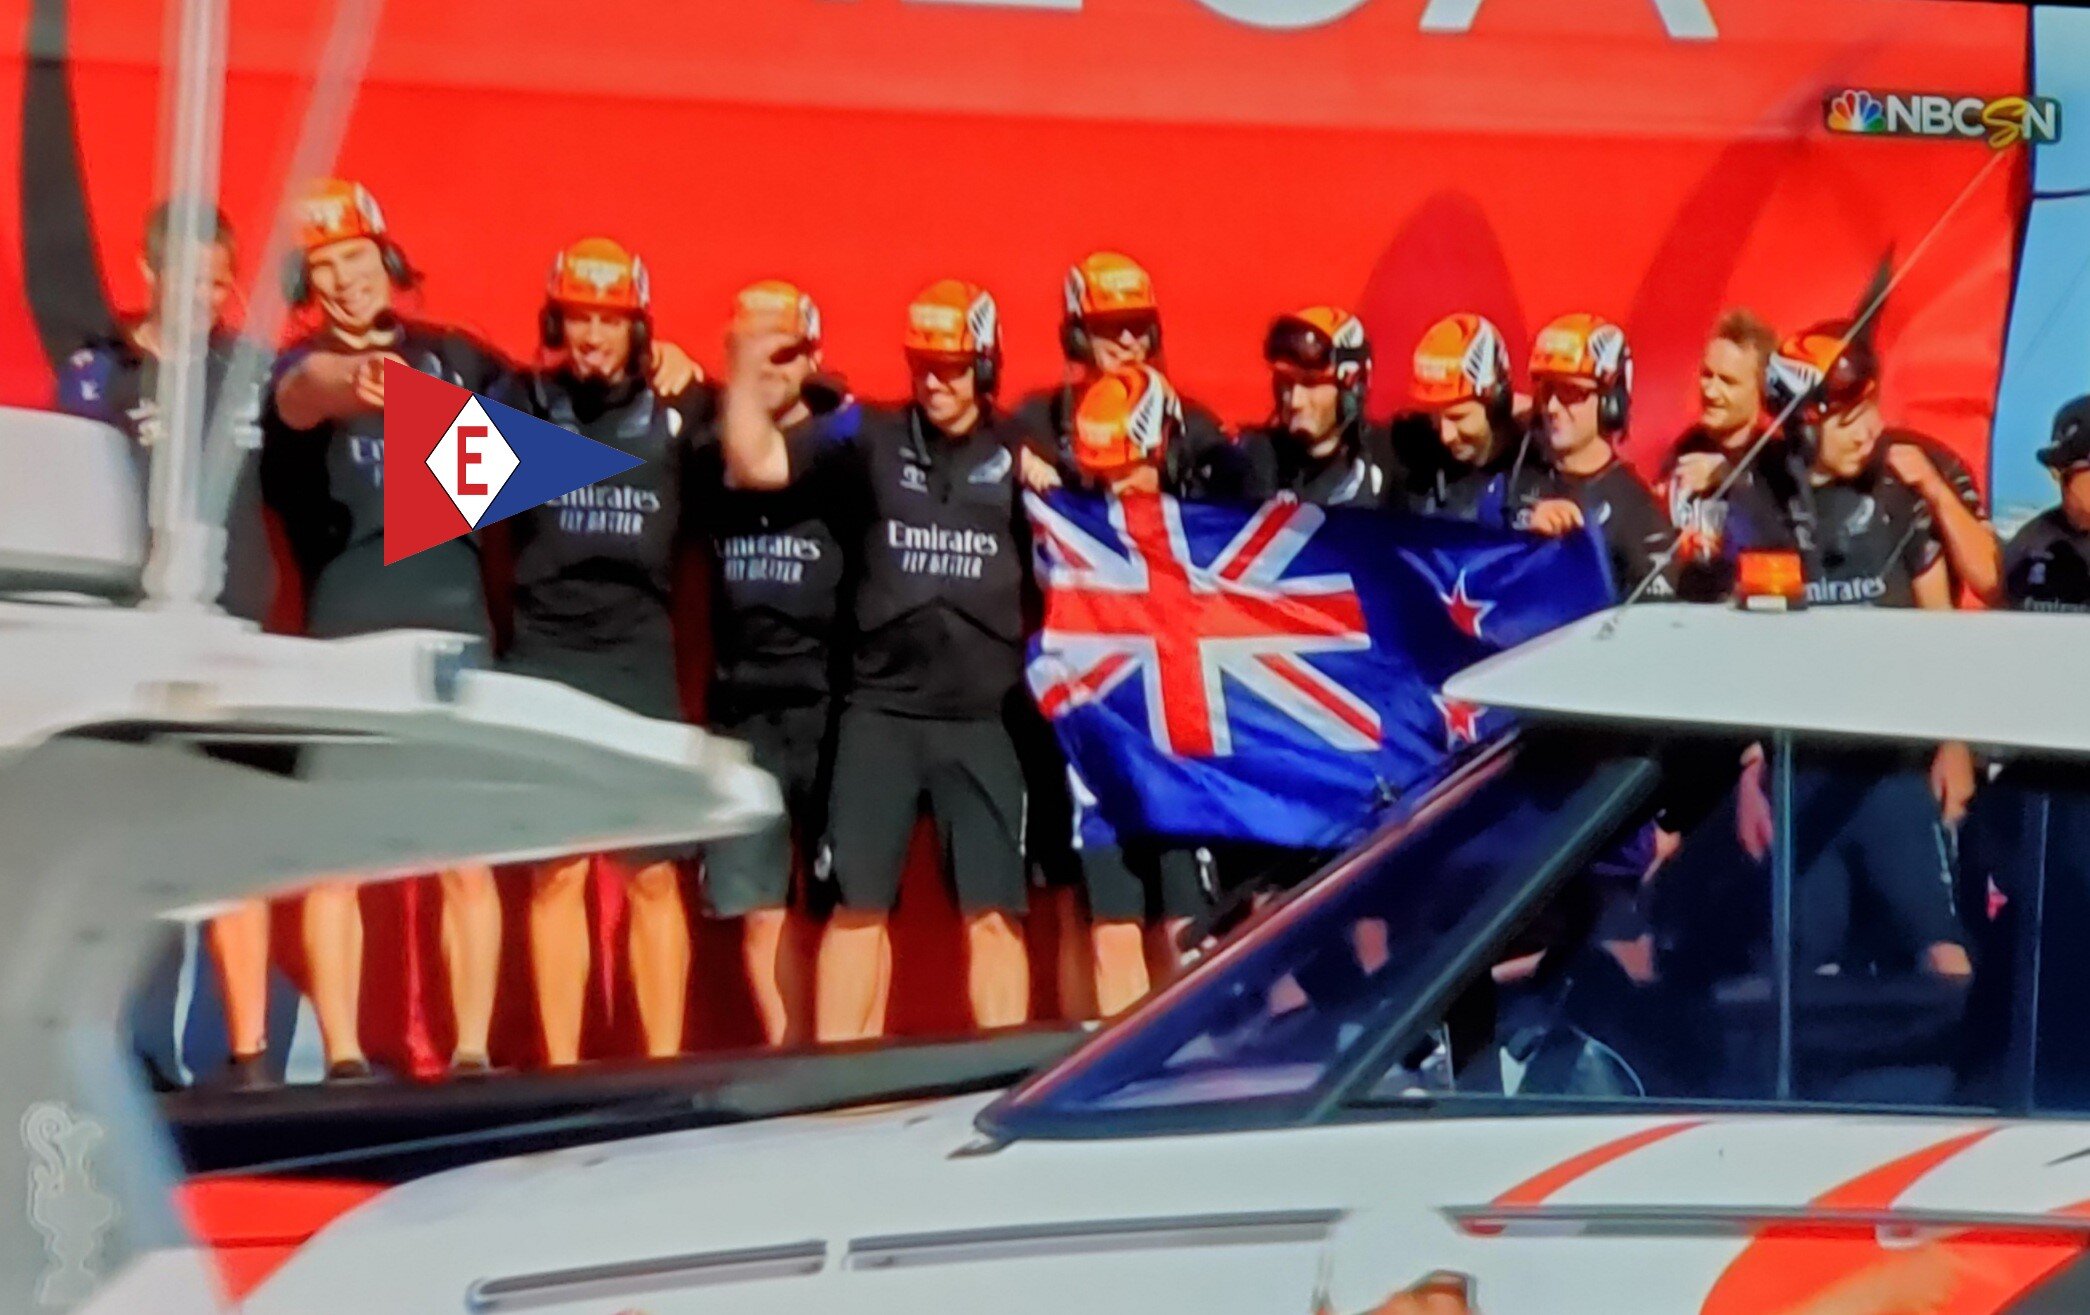  Who knew that Americas Cup winner Team New Zealand had so much EYC pride? 